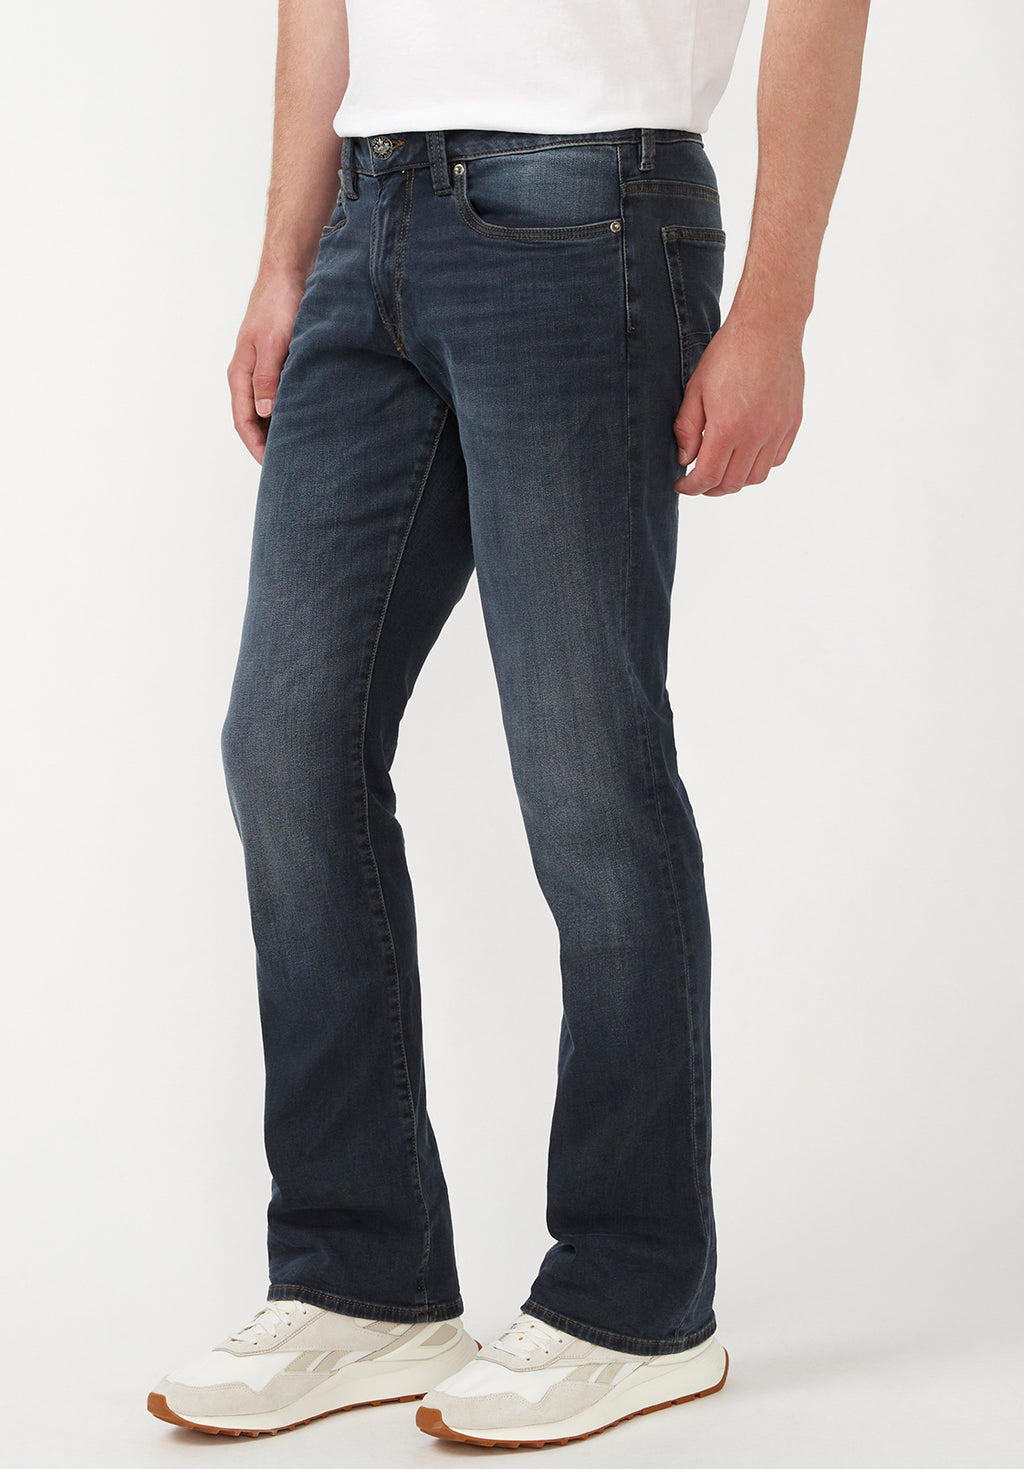 Buffalo David Bitton Men's Relaxed Straight Driven Jeans, Crinkled